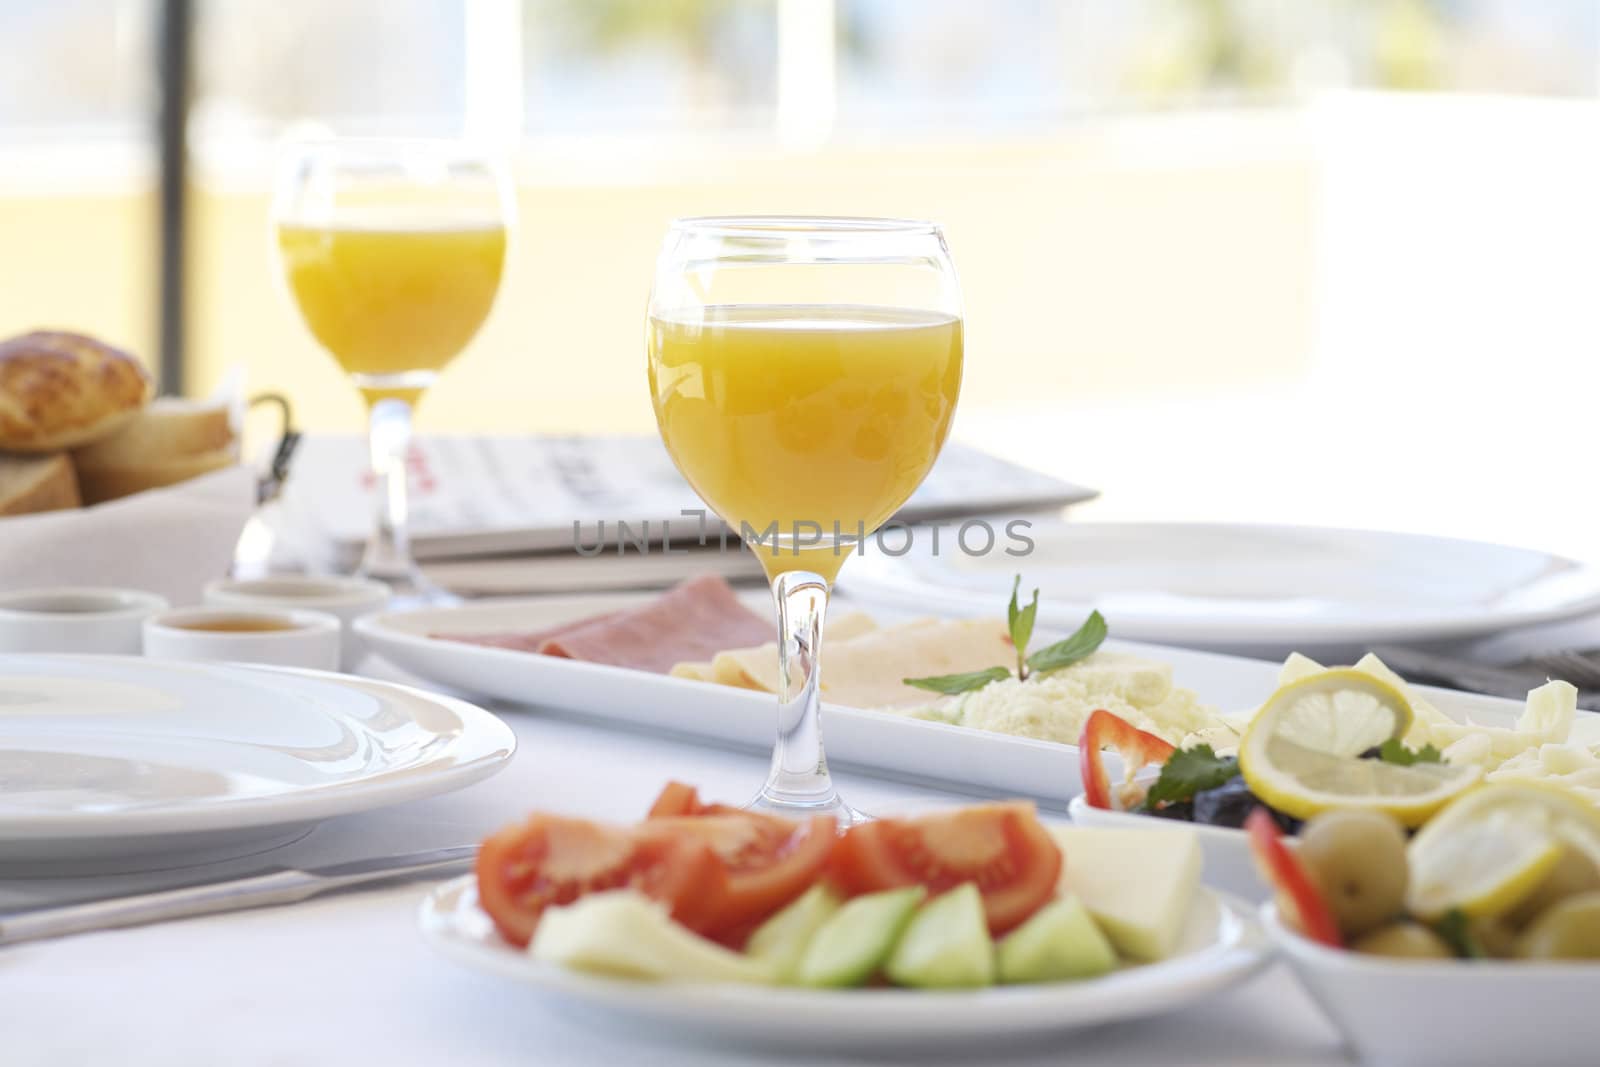 Fresh orange juice on breakfast table with tomatoes, cucumber, cheeses and olives